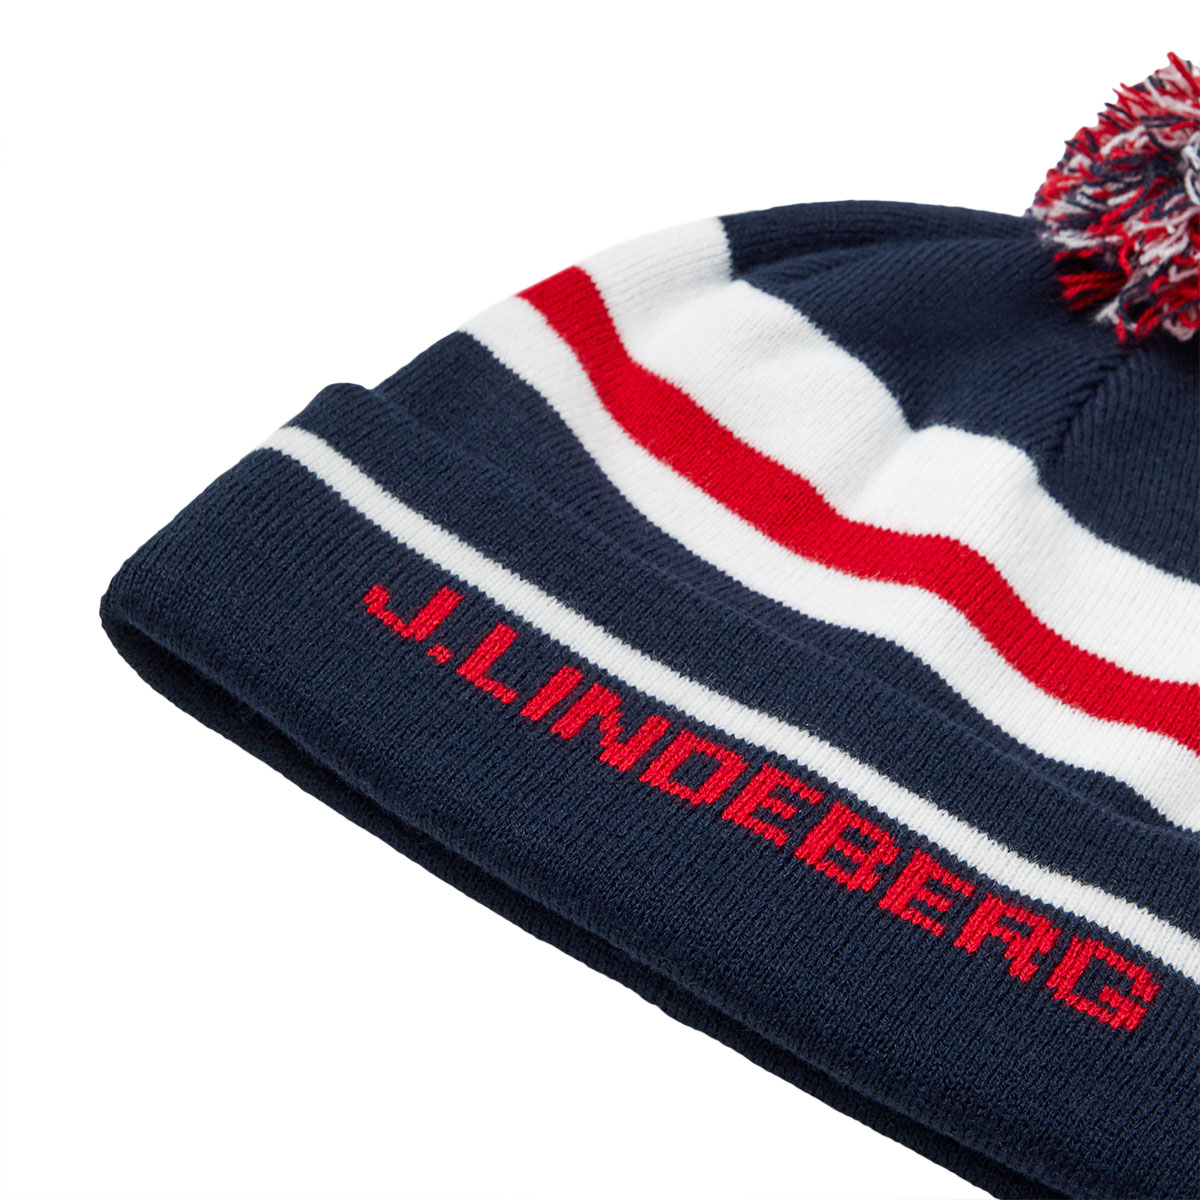 J.Lindeberg Pom Knit from american golf